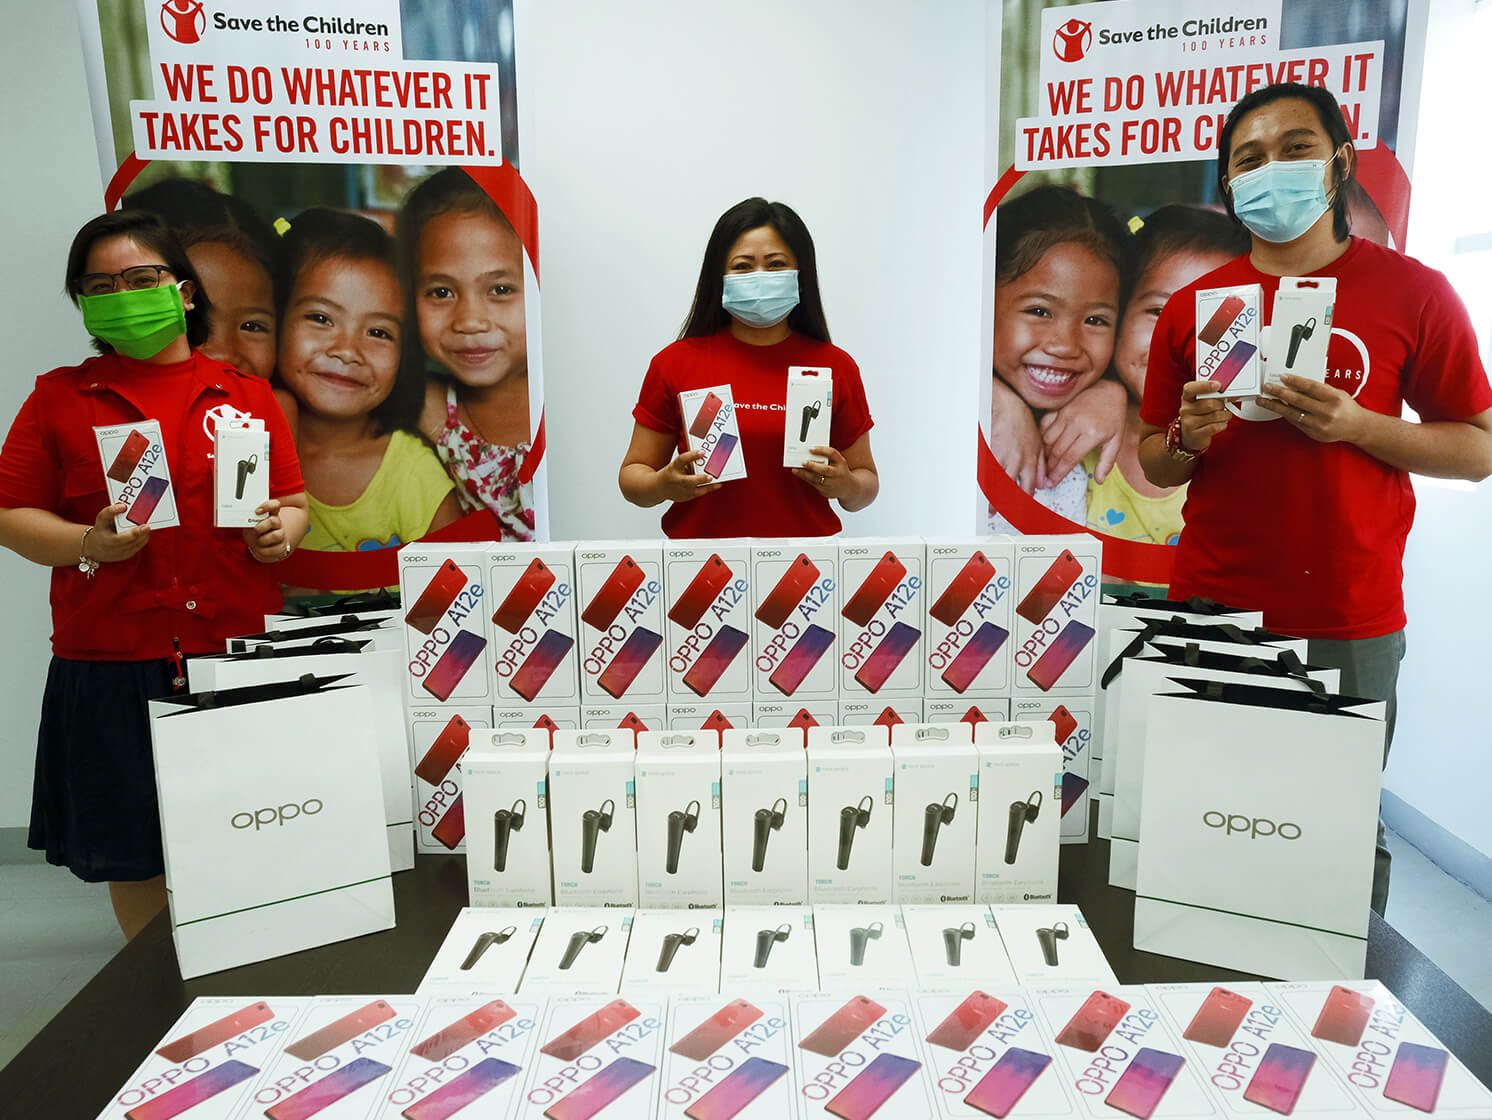 OPPO donates brand new phones and earphones to Save the Children